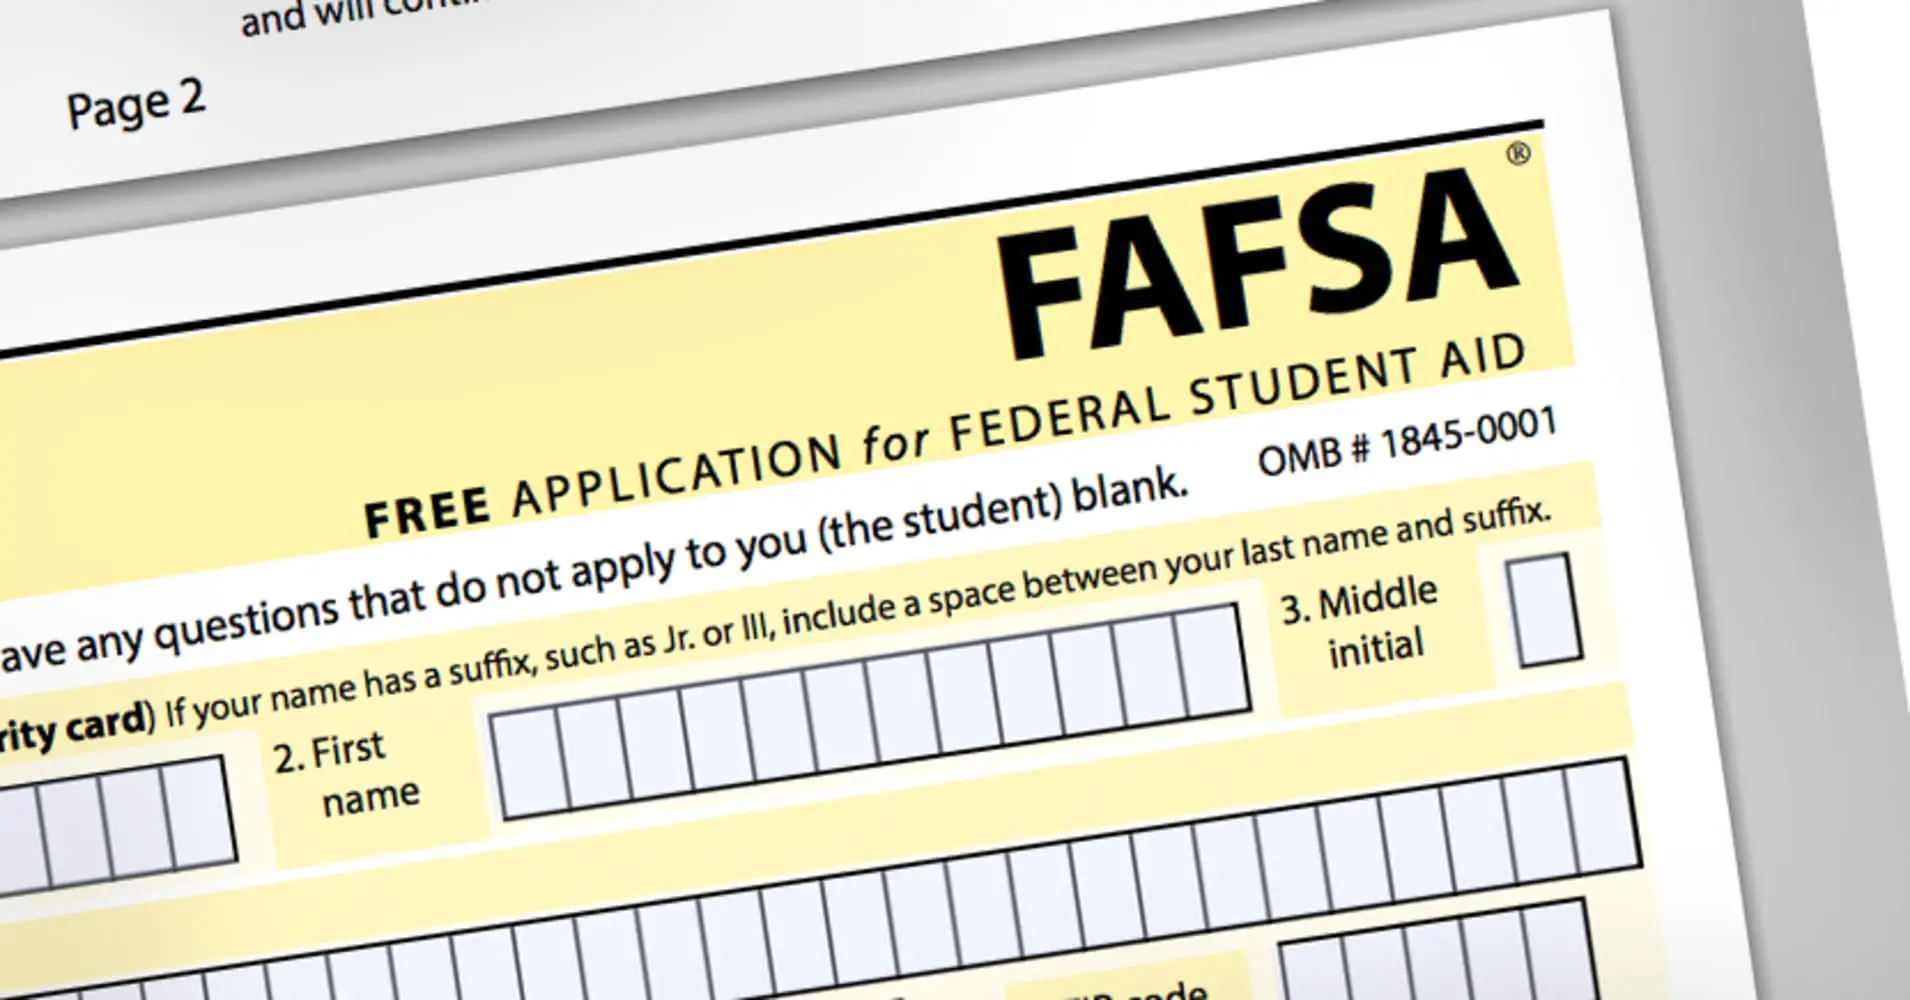 Now is the best time to apply for financial aid